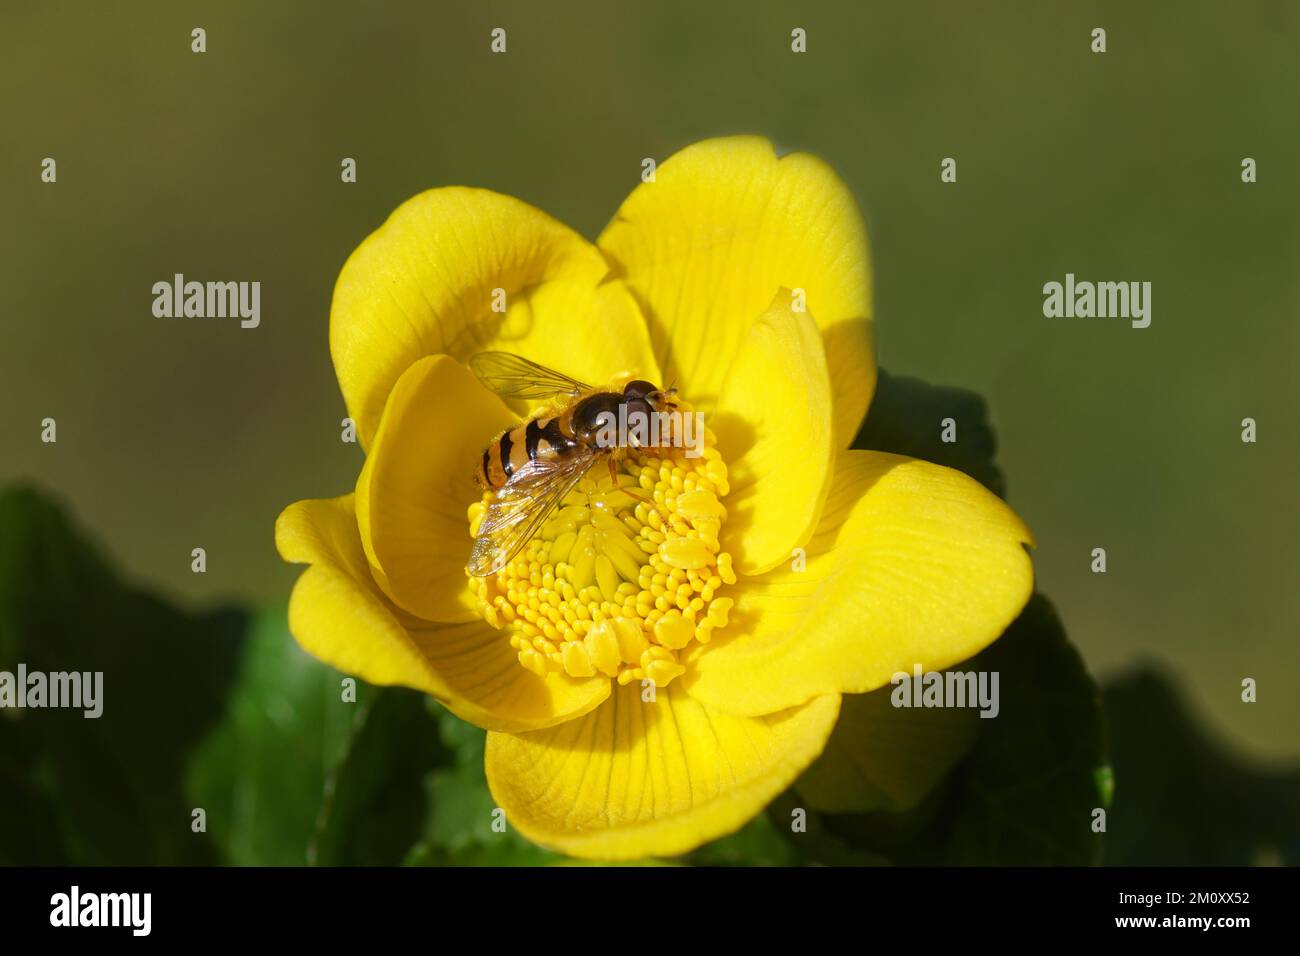 Male hoverfly Epistrophe melanostoma of family Syrphidae on a flower of marsh-marigold or kingcup (Caltha palustris) of the buttercup family (Ranuncul Stock Photo